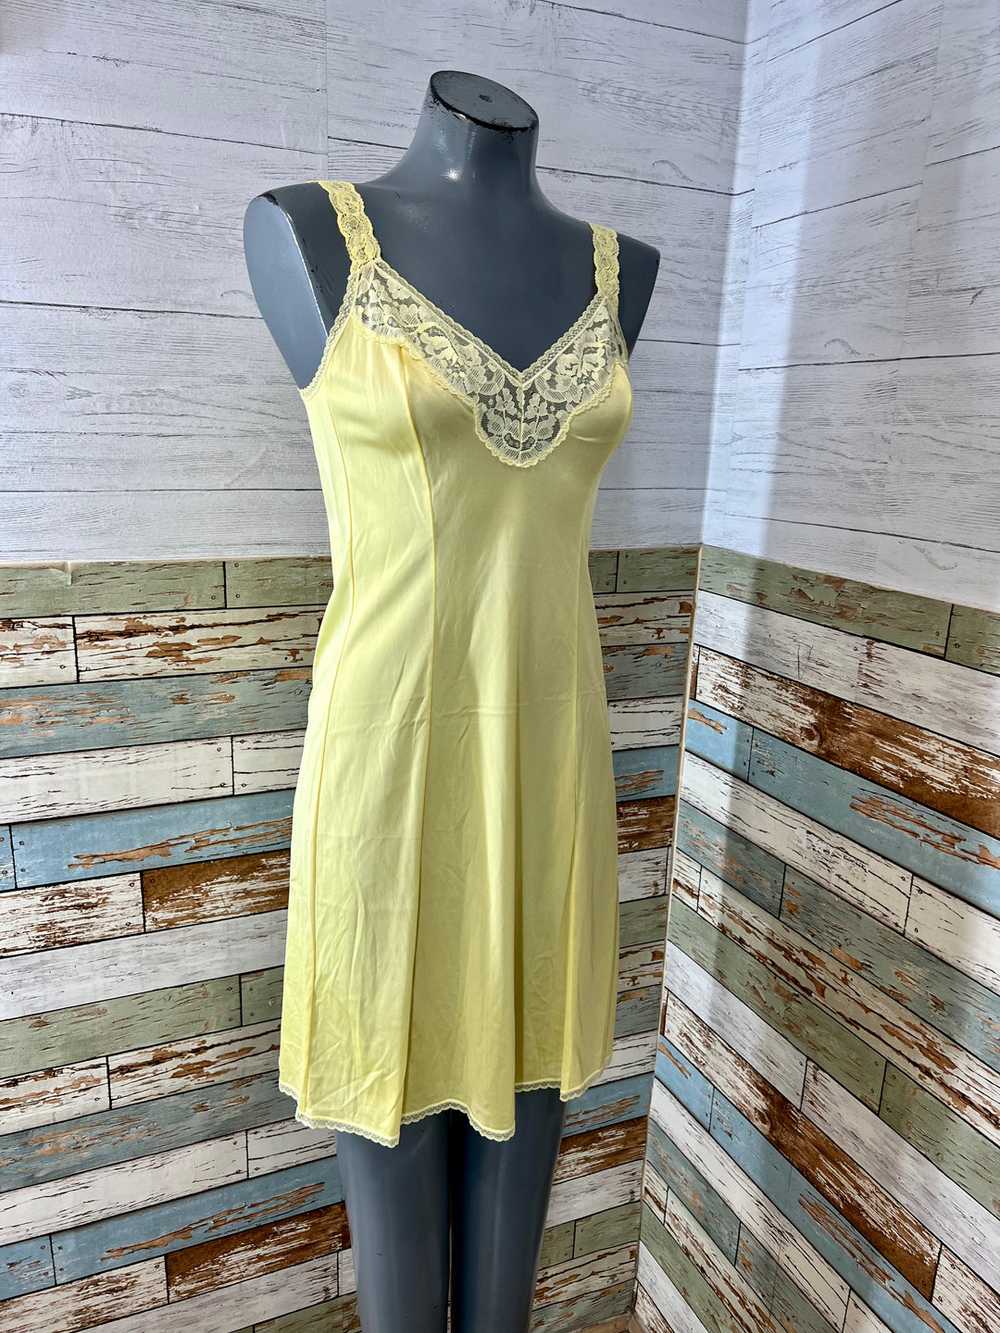 70’s Yellow Slip Dress with Lace - image 2